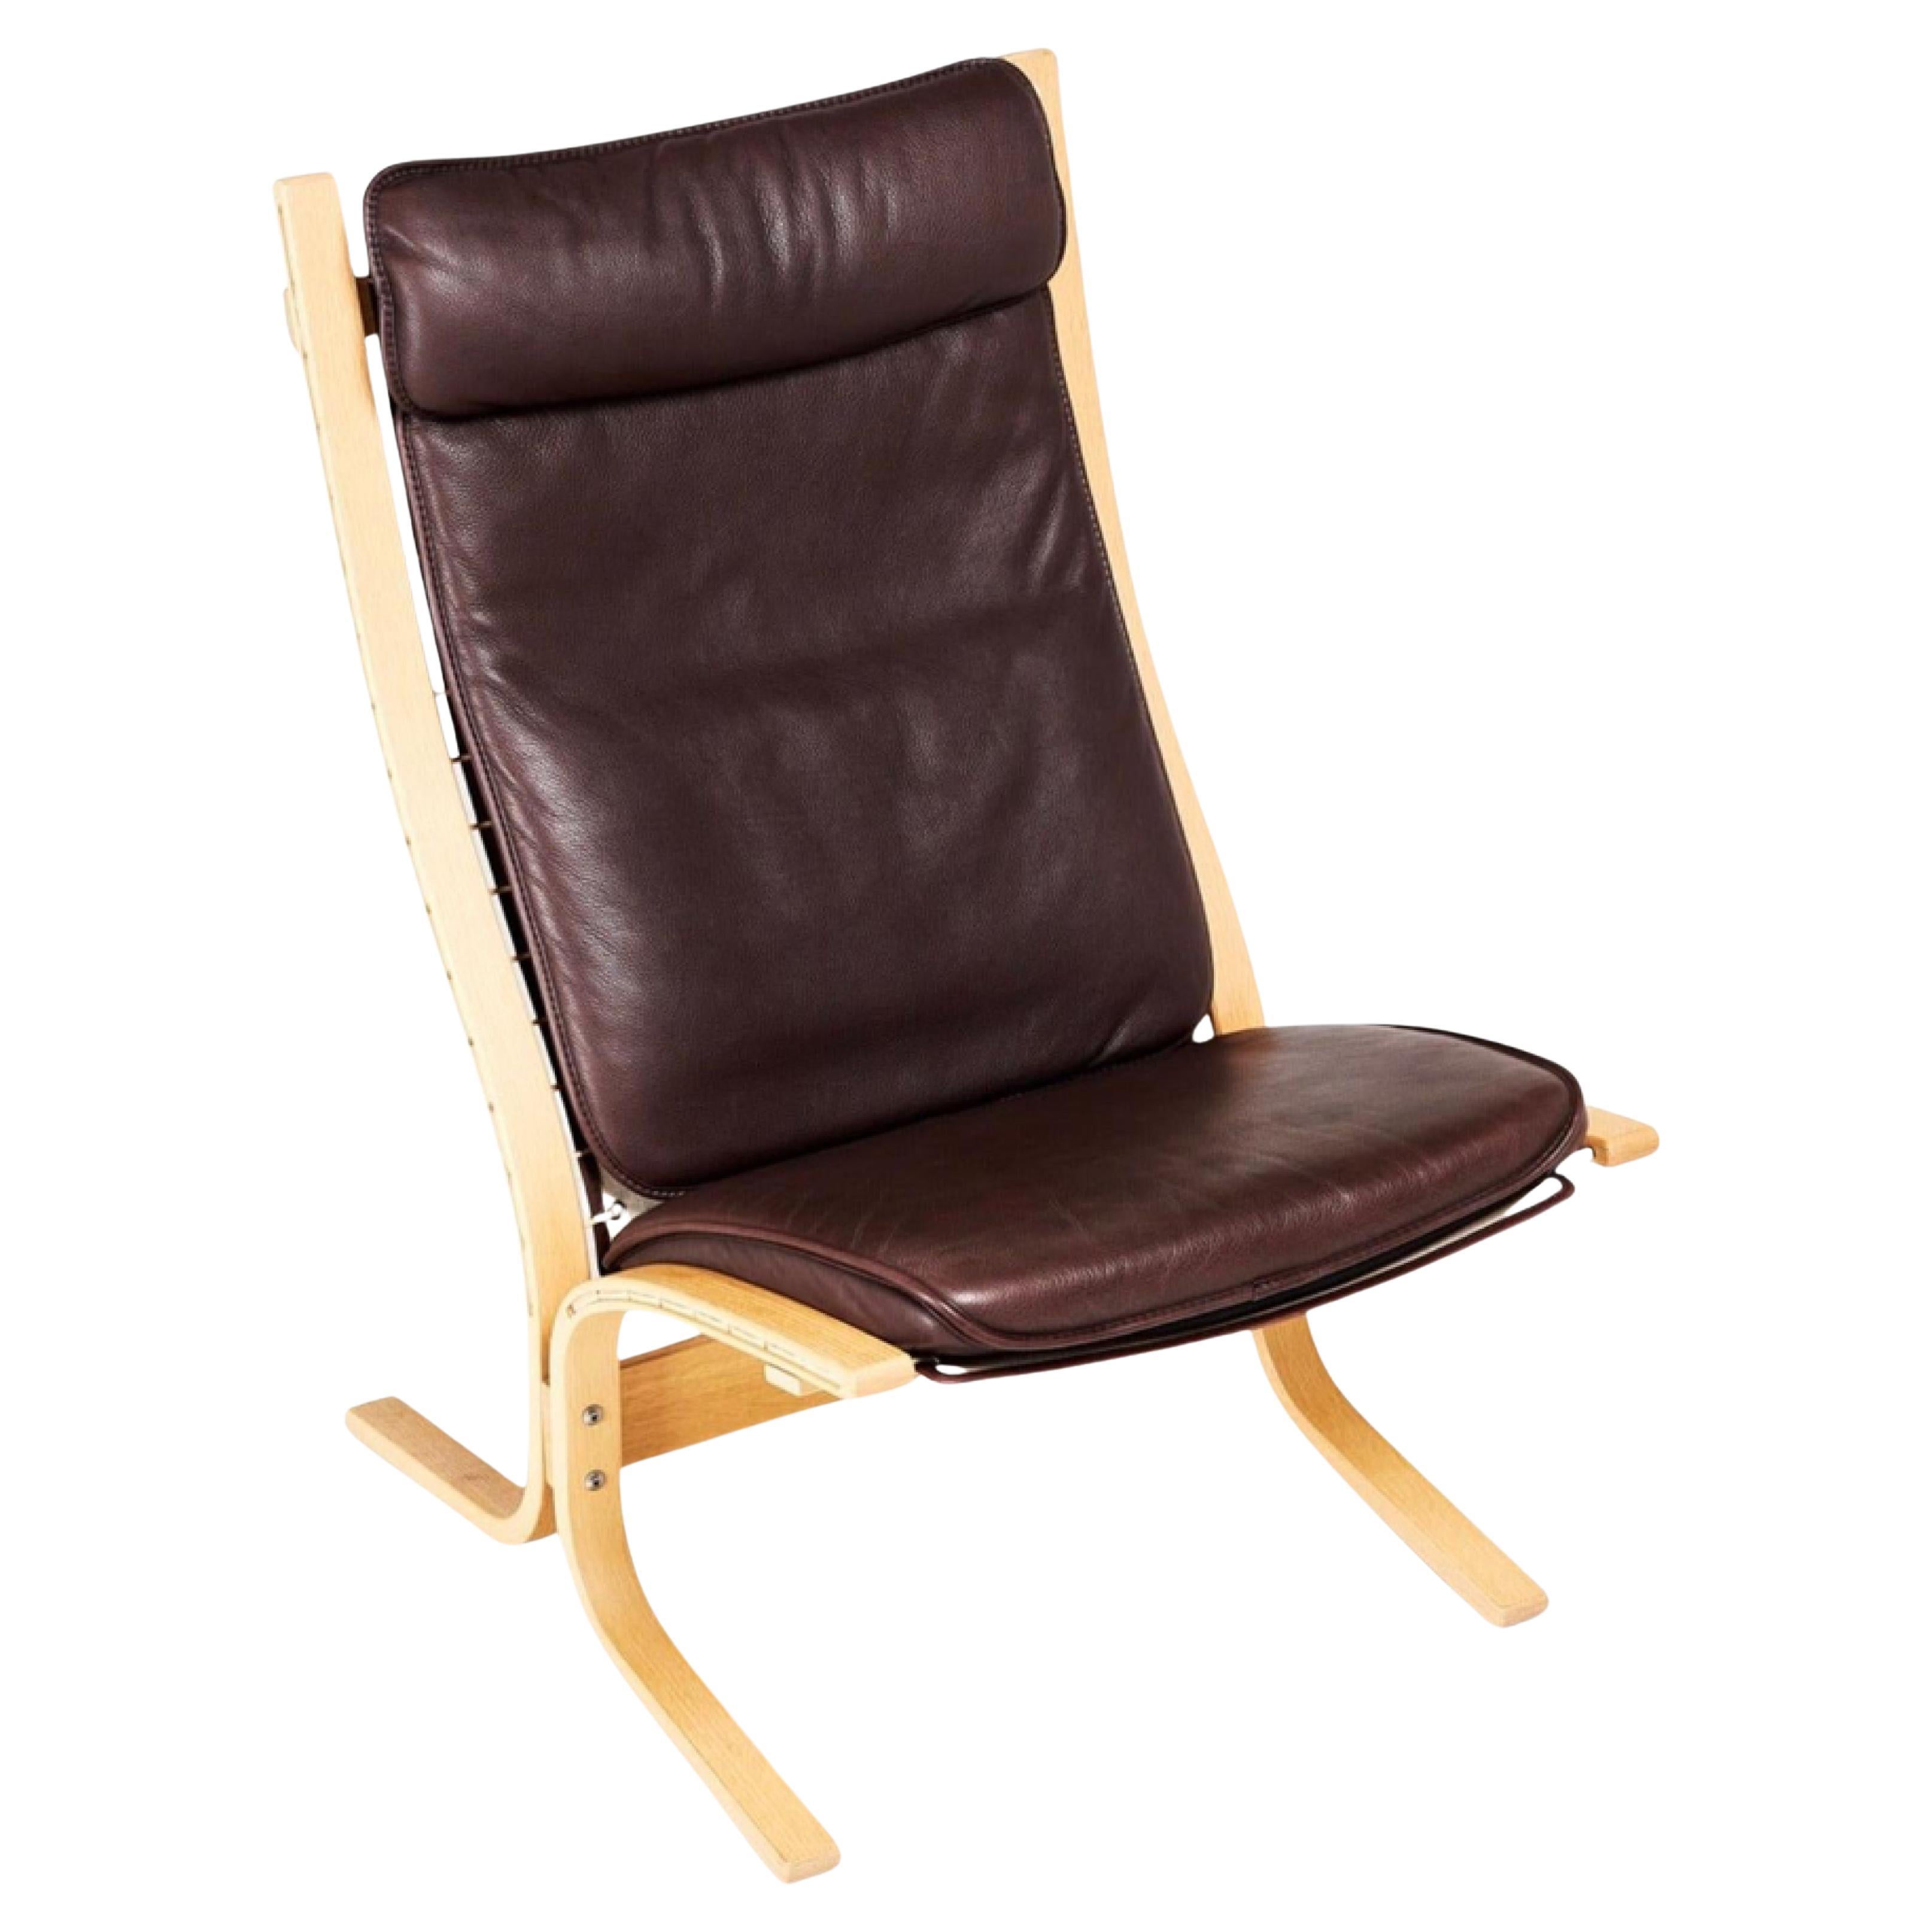 Ingmar Relling "Siesta" lounge chair - Flora edition, high back For Sale